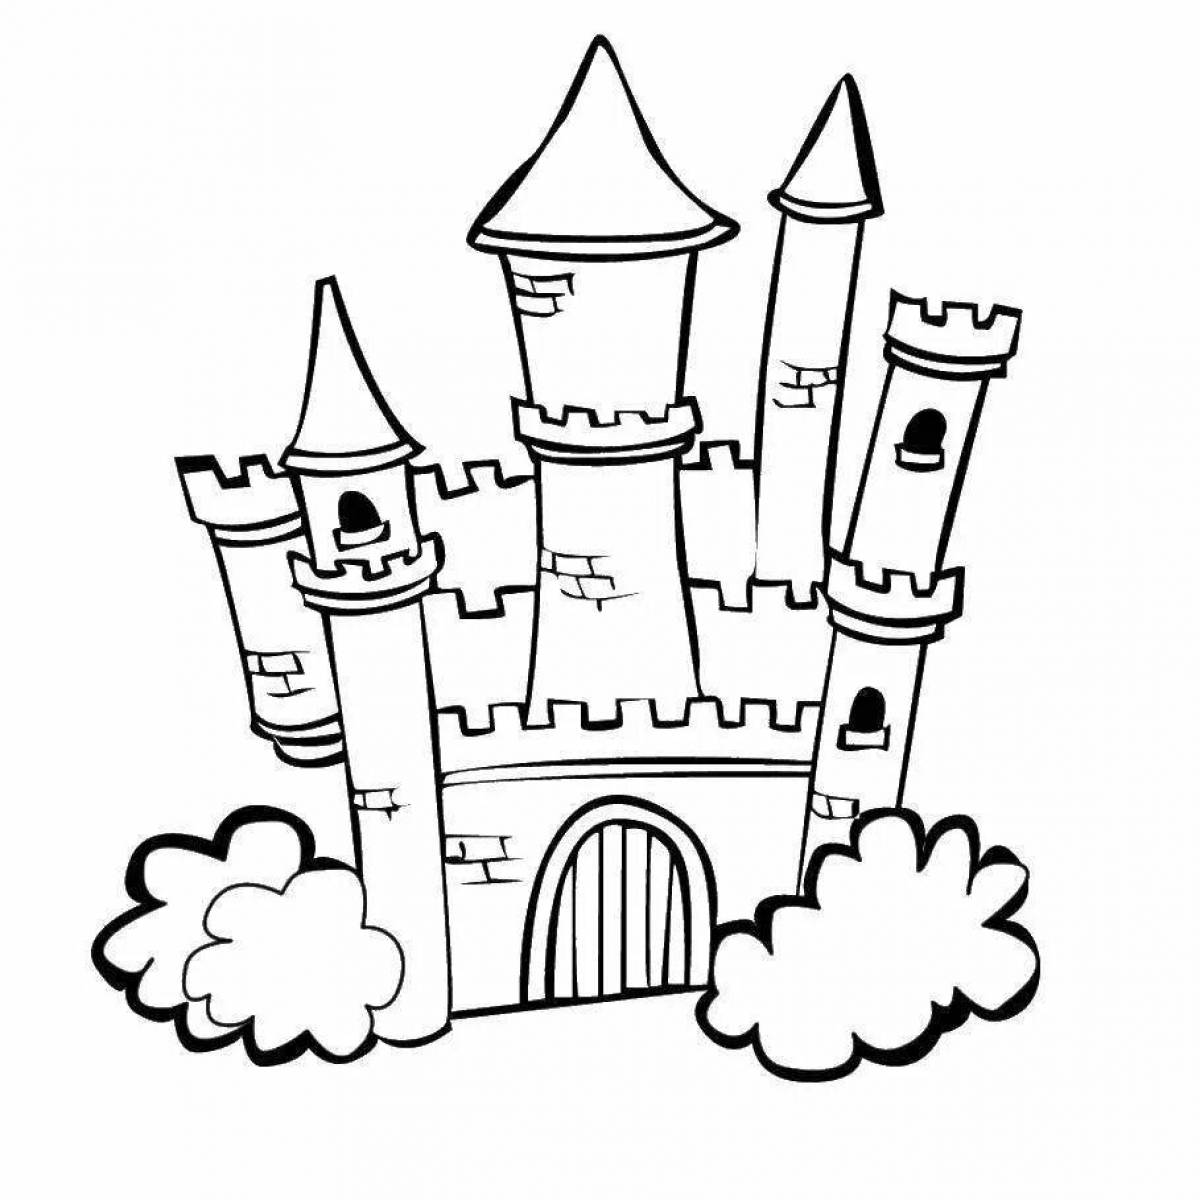 Exquisite fortress coloring page